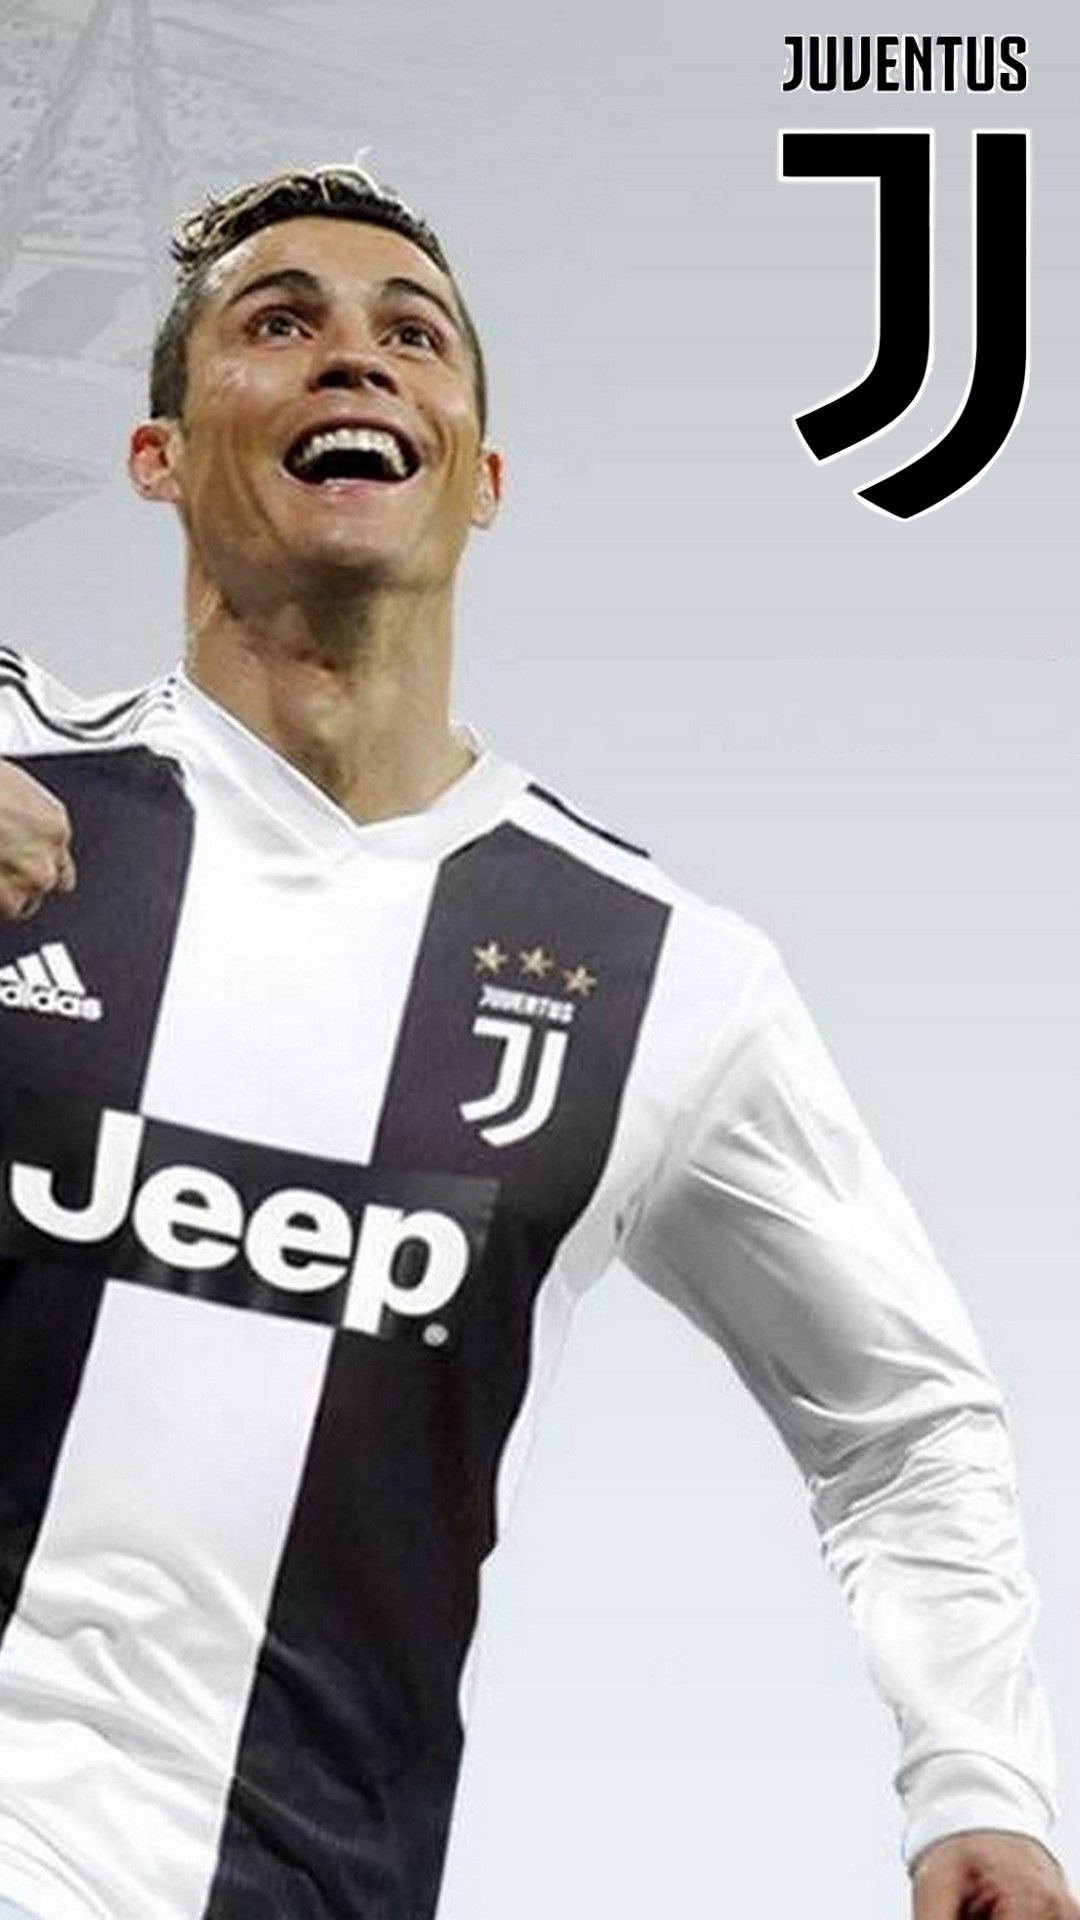 CR7 Juventus HD Wallpaper For iPhone With Resolution 1080X1920 pixel. You can make this wallpaper for your Mac or Windows Desktop Background, iPhone, Android or Tablet and another Smartphone device for free